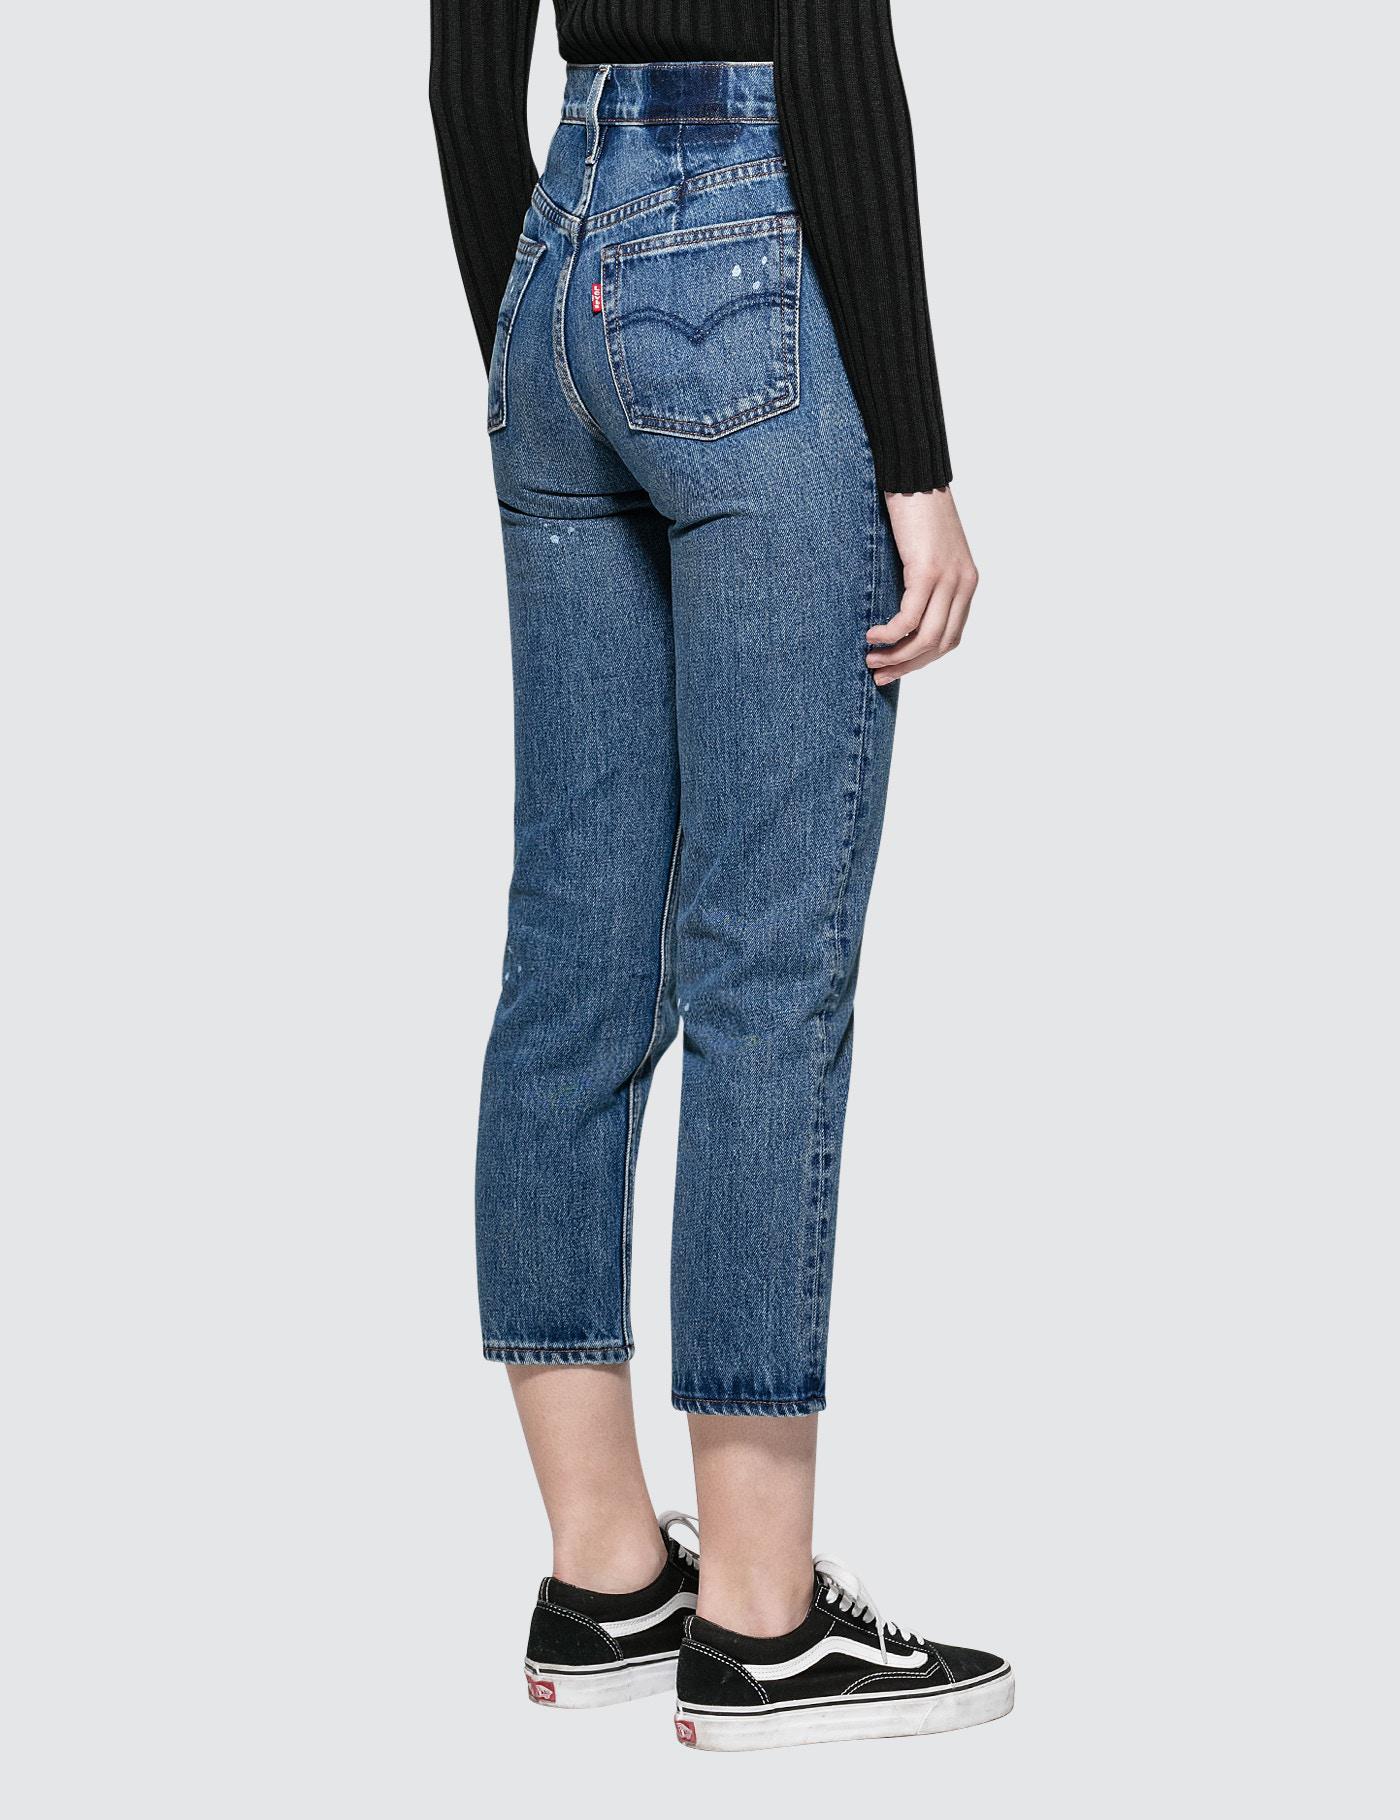 levi's altered straight jeans Cheaper Than Retail Price> Buy Clothing,  Accessories and lifestyle products for women & men -